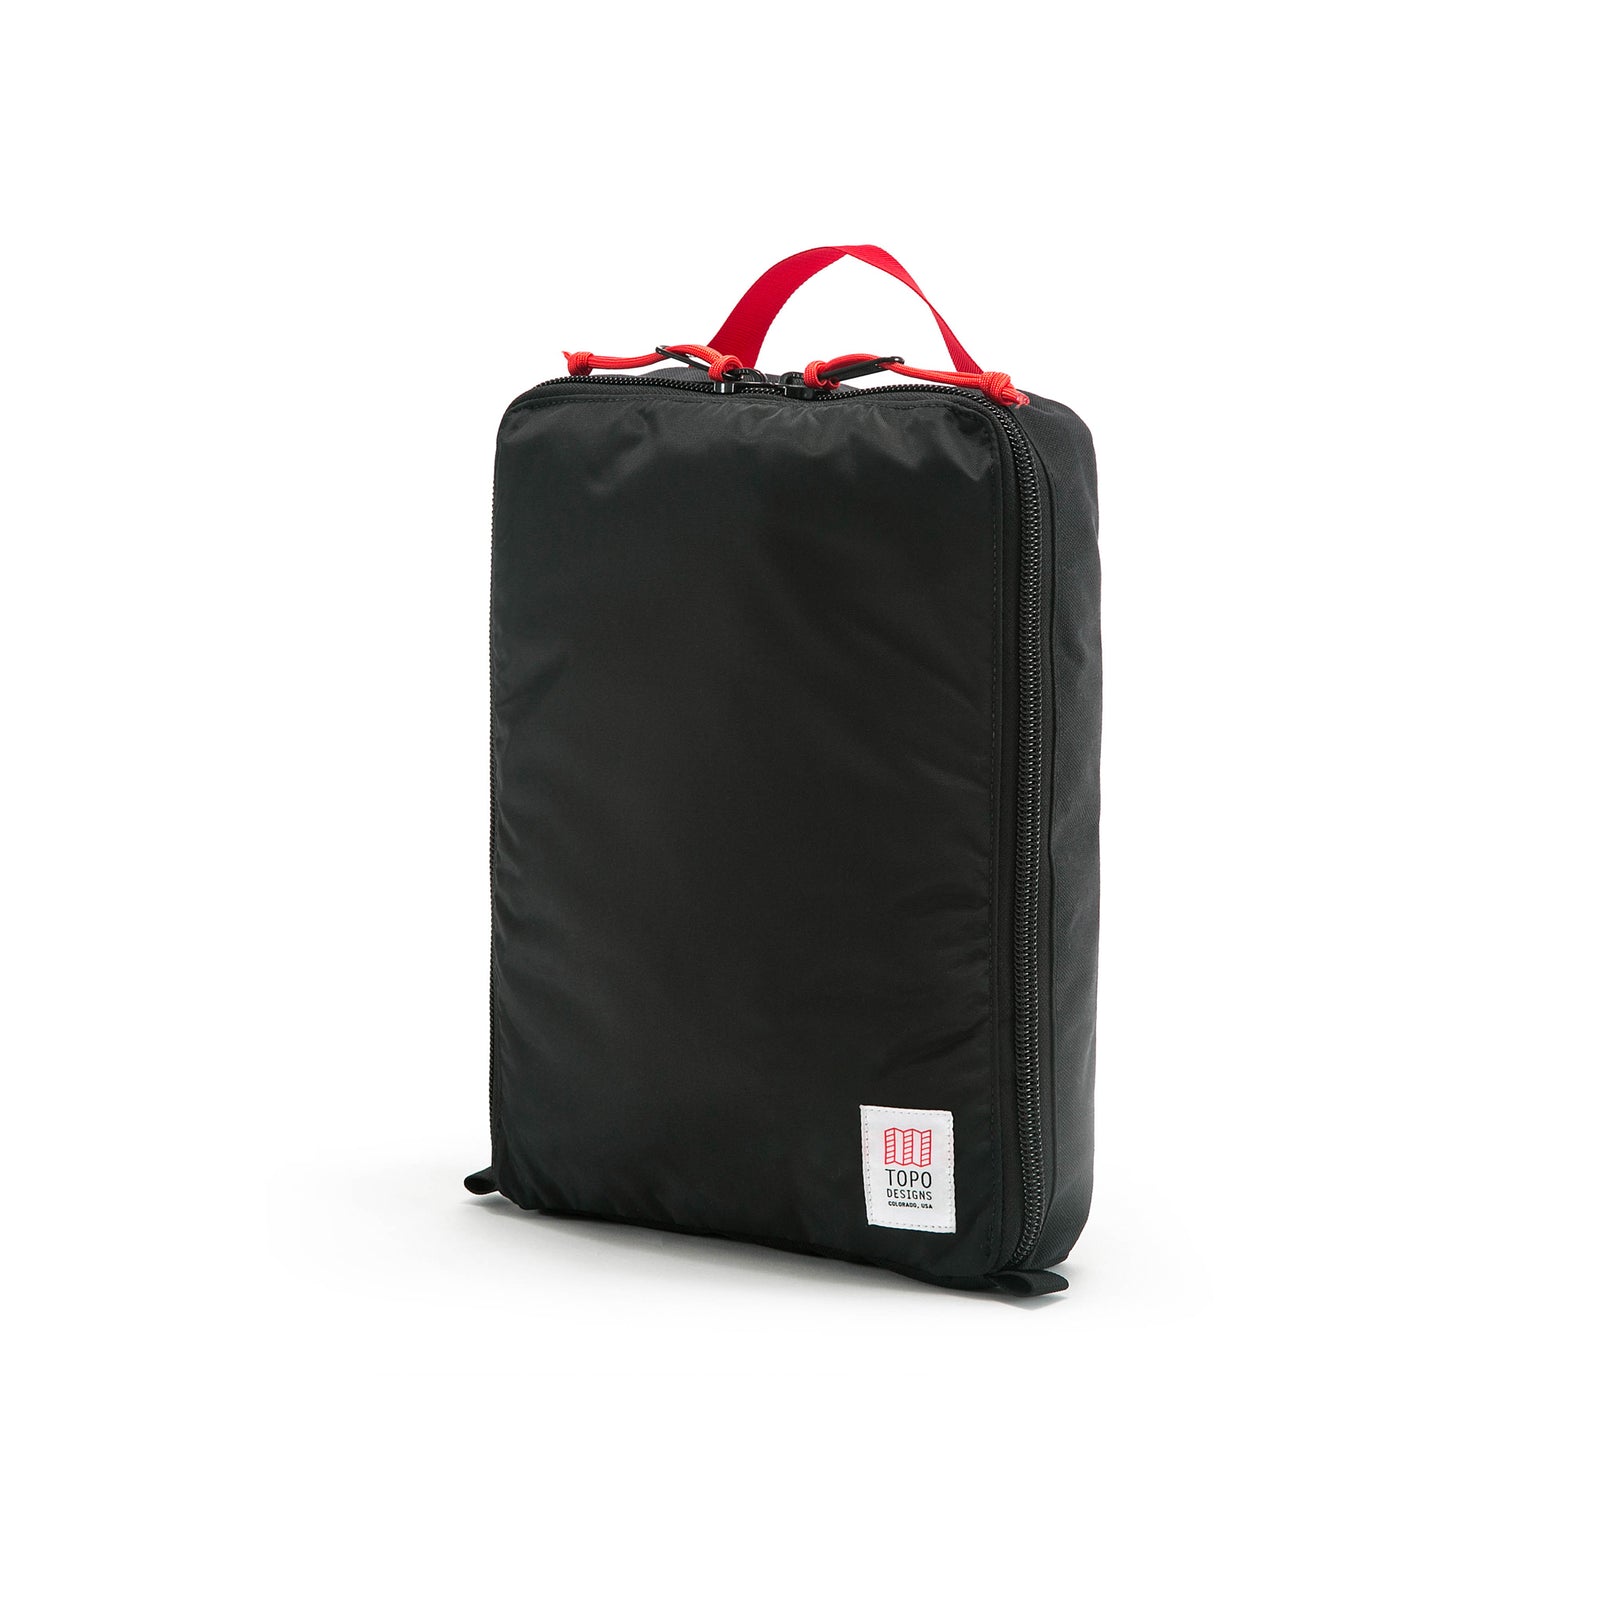 Topo Designs Pack Bag 10L travel packing cube in "Black".